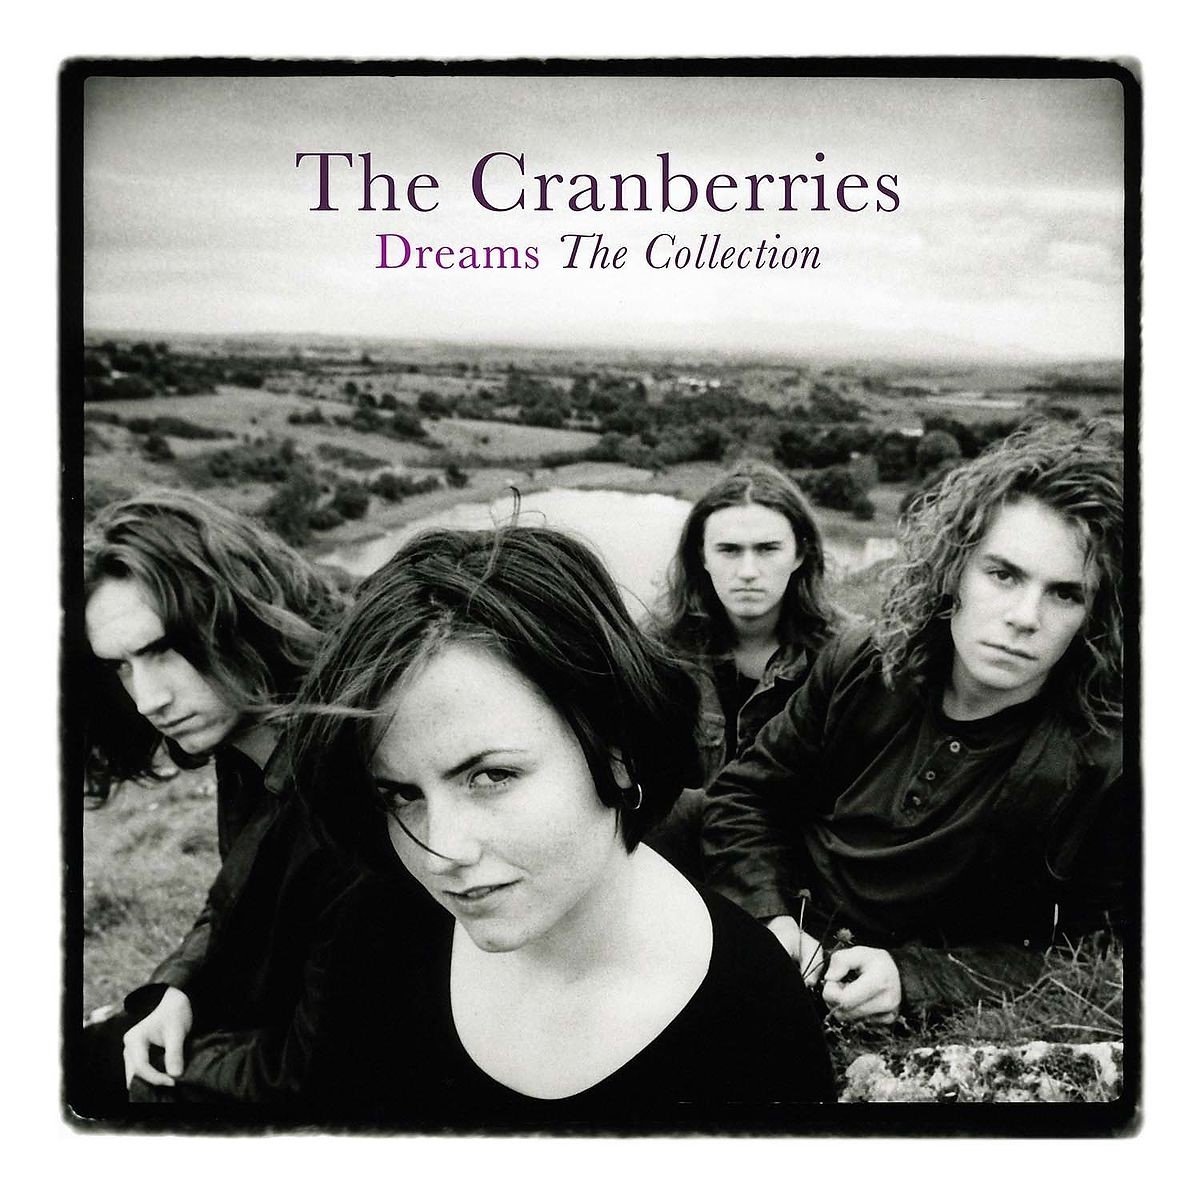 The Cranberries - Dreams: The Collection (LP) - the Cranberries